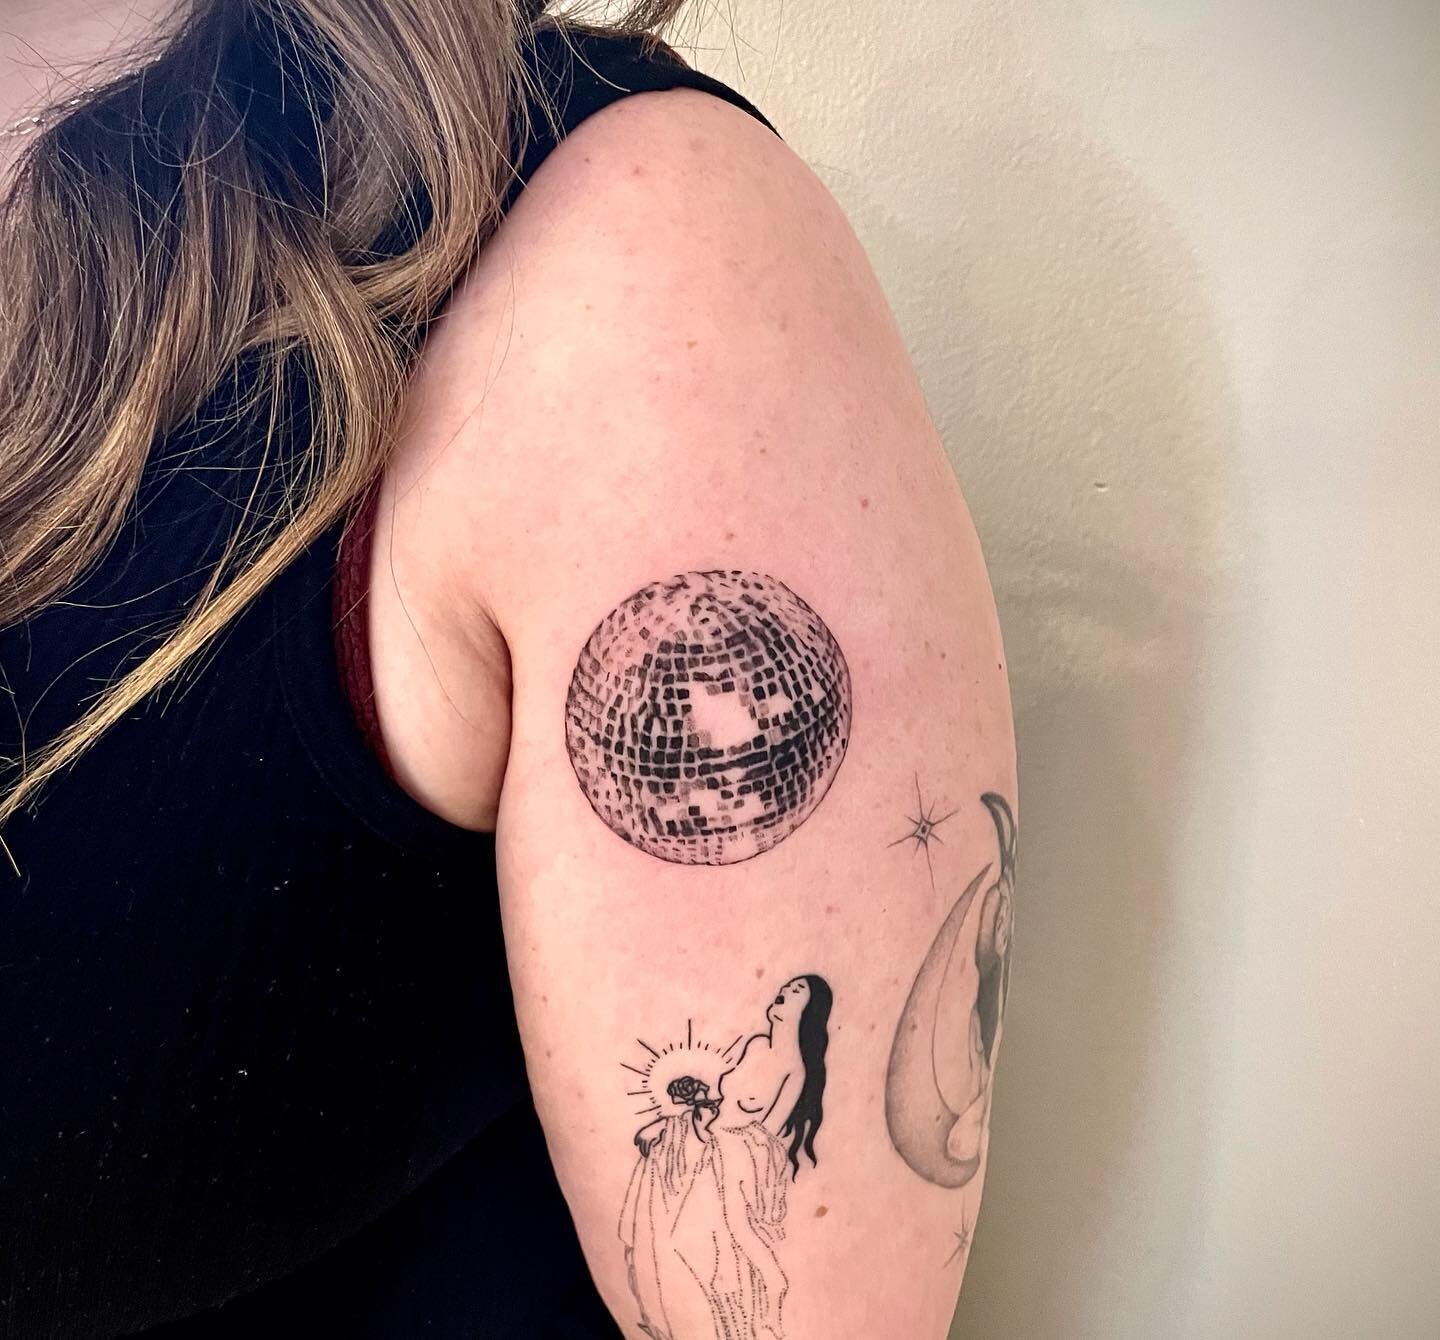 Of course I did a disco ball during my trip to Portland&hellip; I actually did 2!

🪩🪩🪩

Now booking September! Email me to schedule an appointment.

Done at the lovely @tattoo34pdx 

#discoball #discoballtattoo #mirrorballtattoo #mirrorball #refle